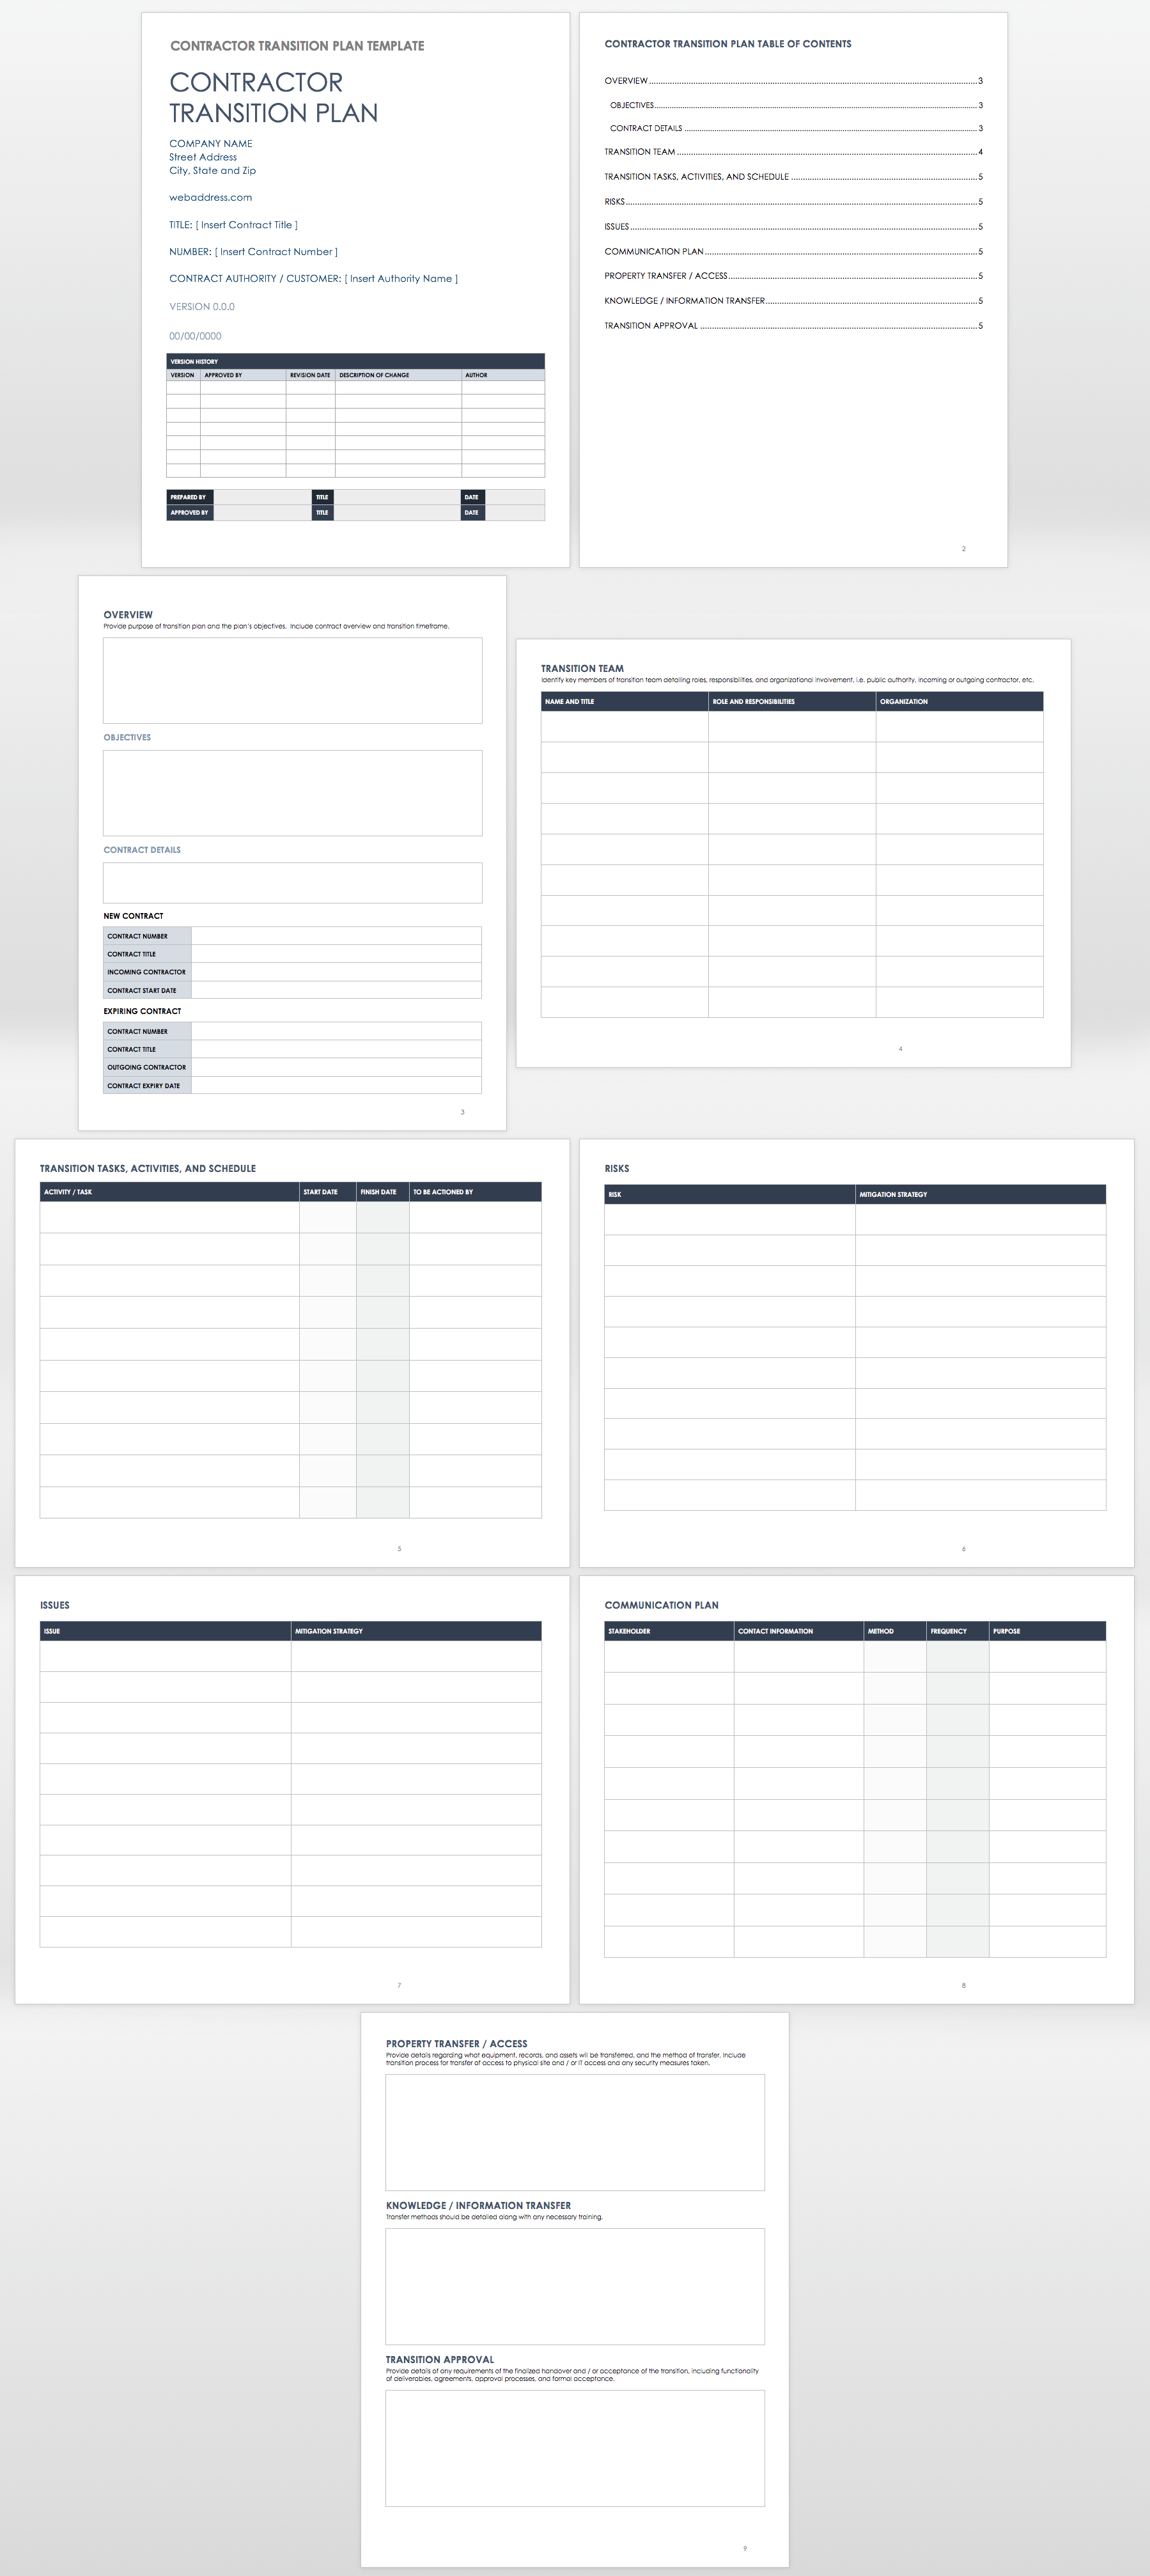 Project Management Transition Plan Template from www.smartsheet.com